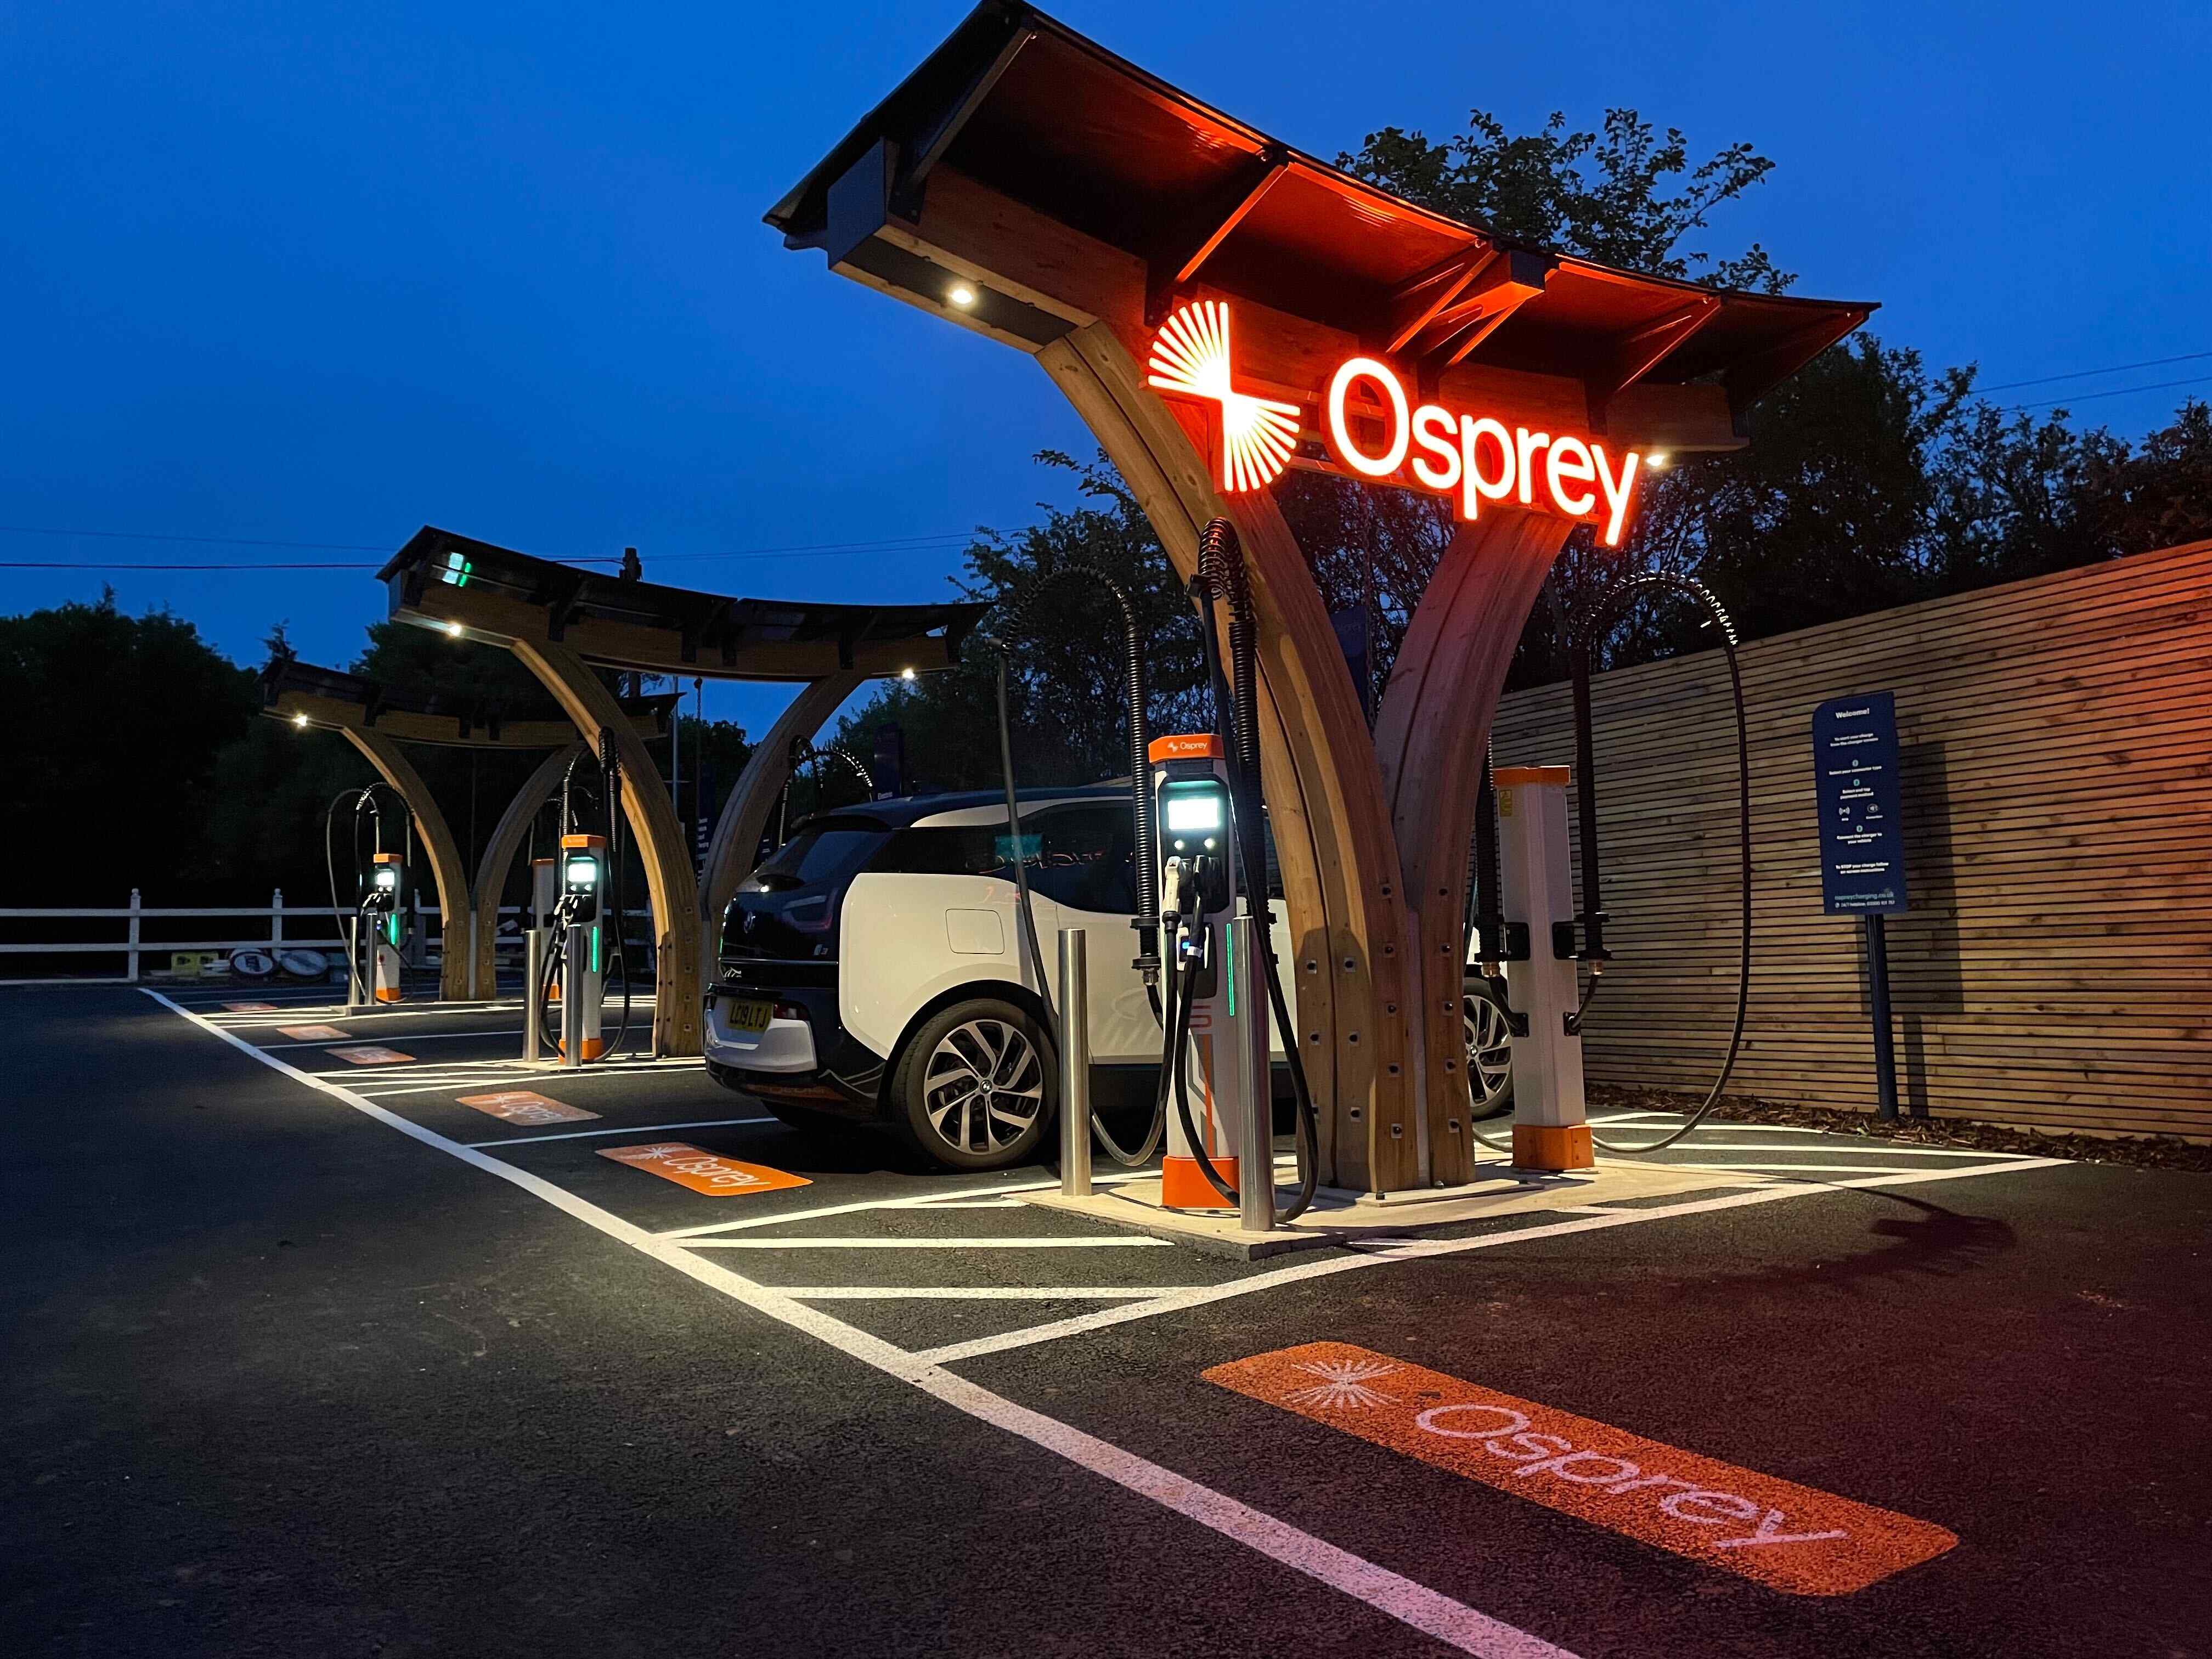 Design of the Osprey hub optimises safety and accessibility, earning it the UK’s highest ChargeSafe inspection score to date (4.79), for its extra space, ease of use and canopies providing shelter and lighting